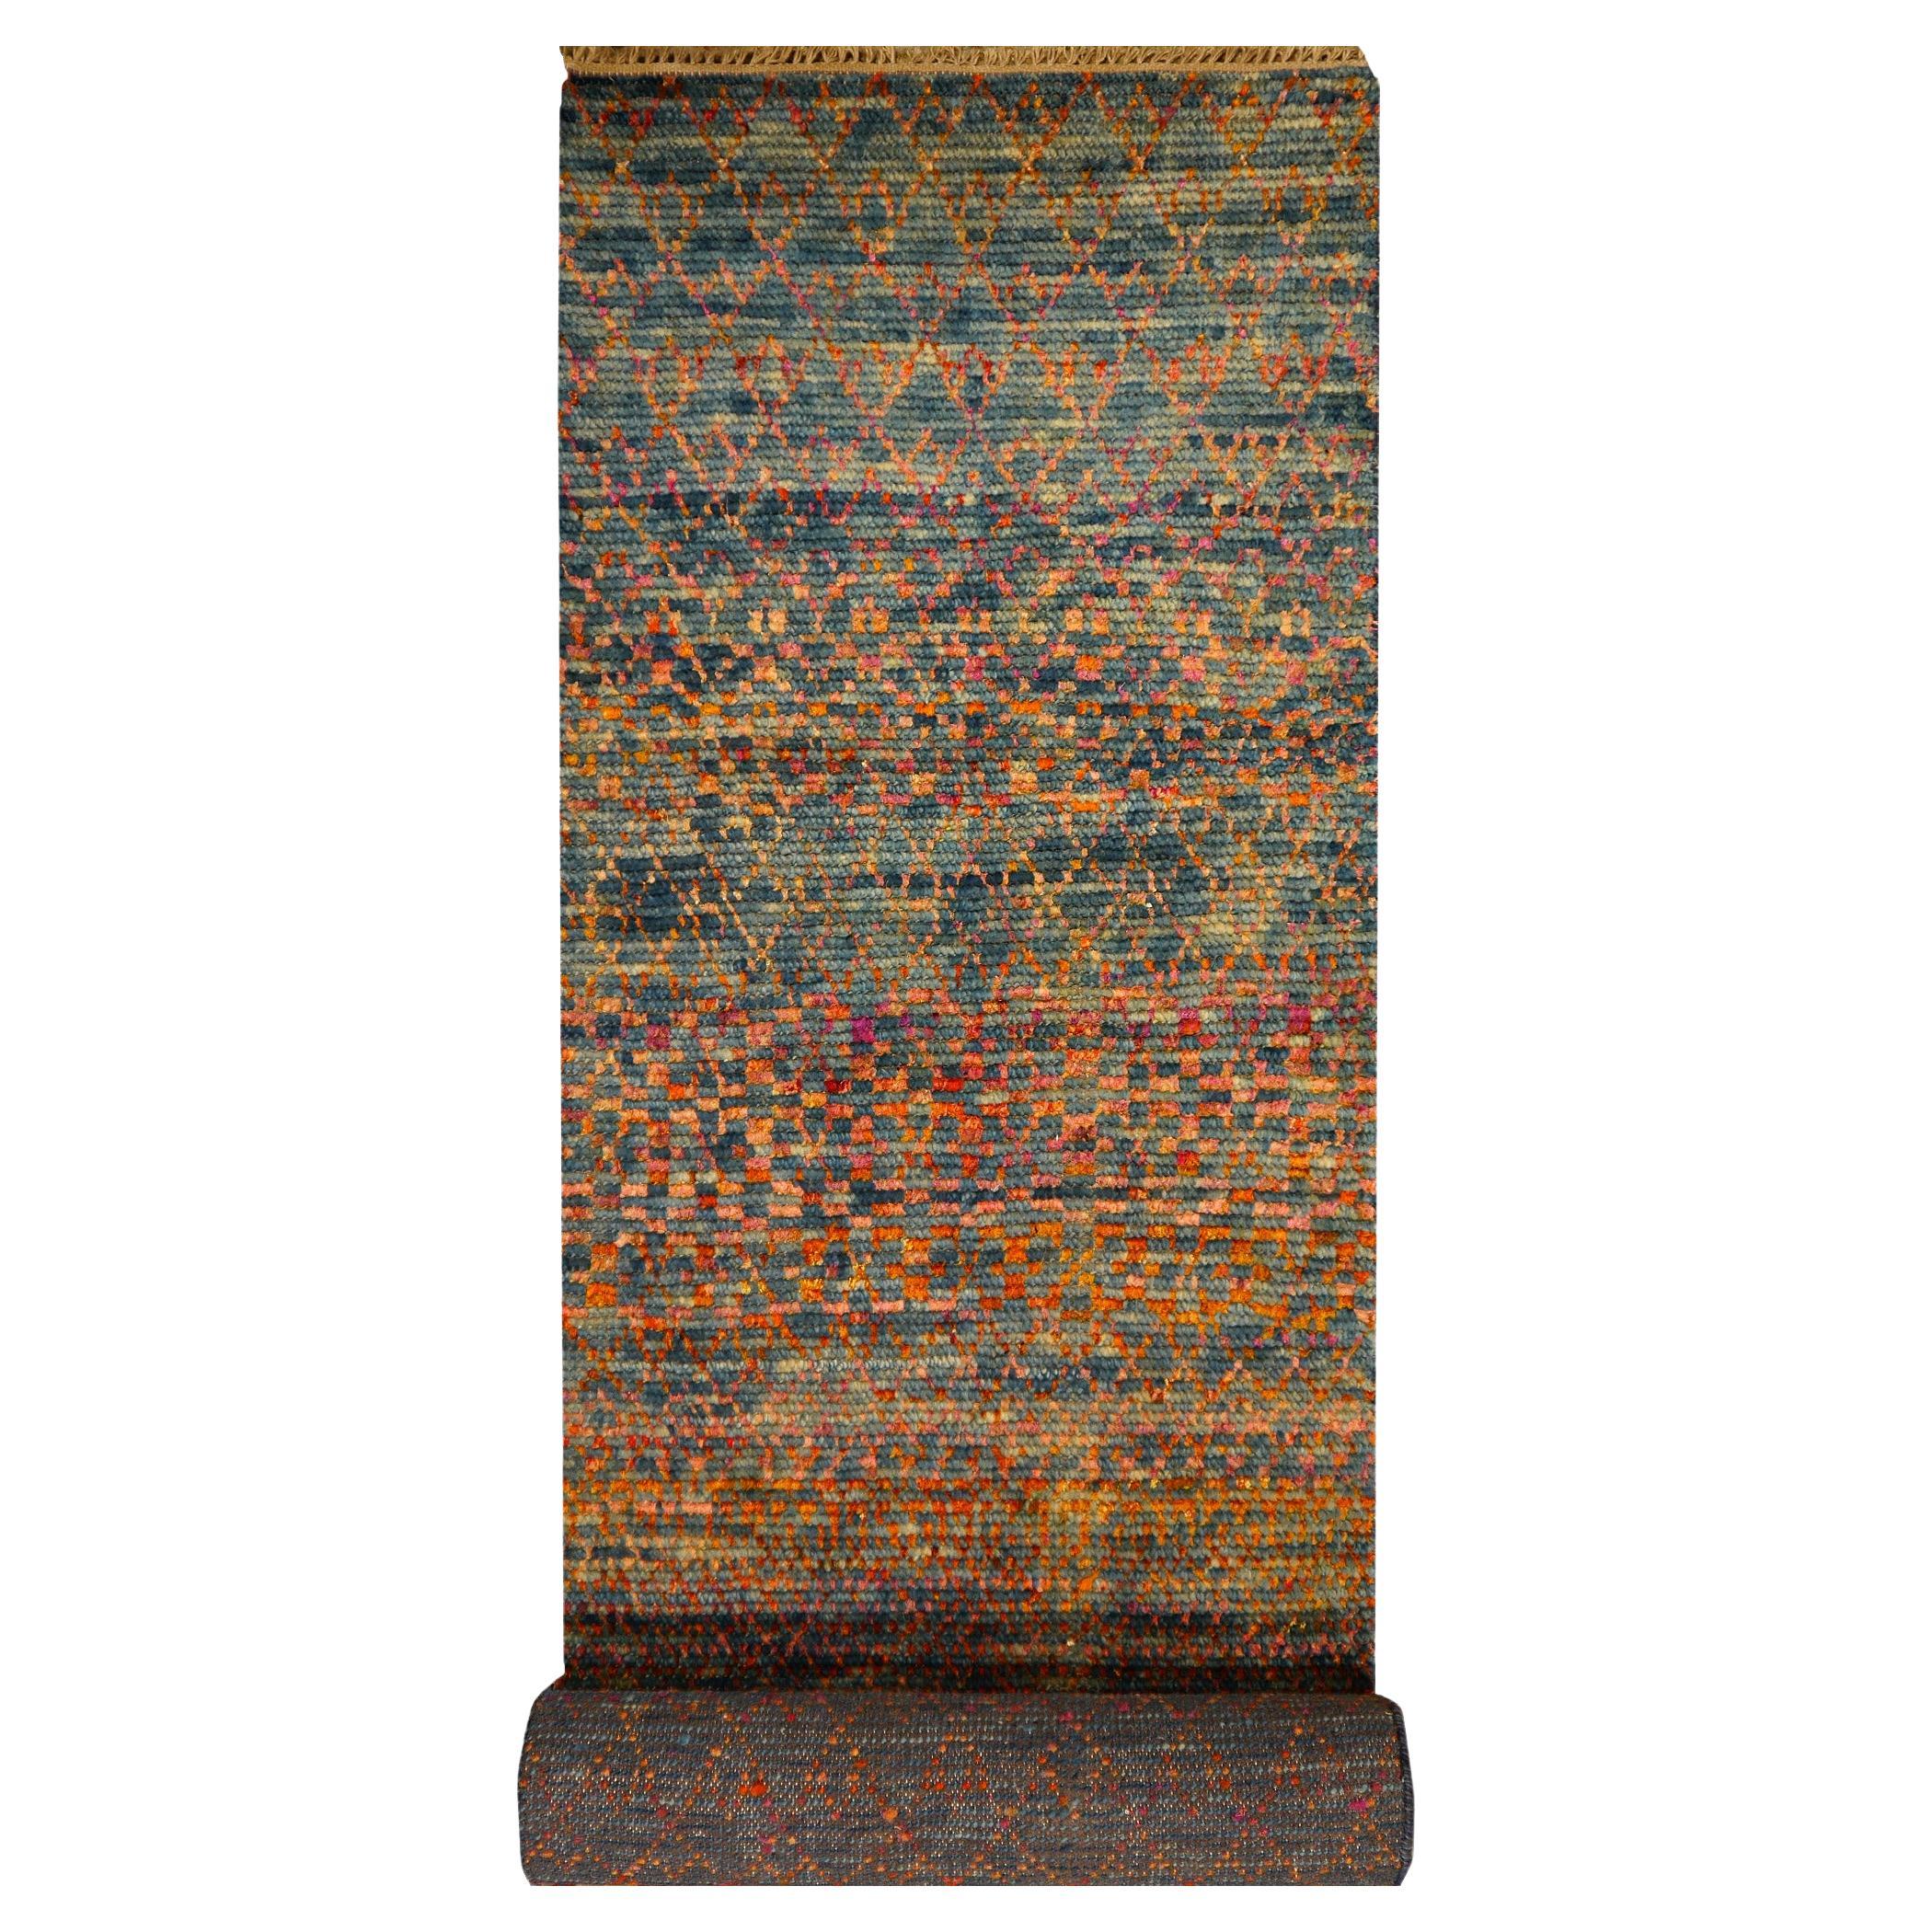 Modernity Hallway Runner Design Rug Hand Knotsted Wool and Silk Djoharian Collection